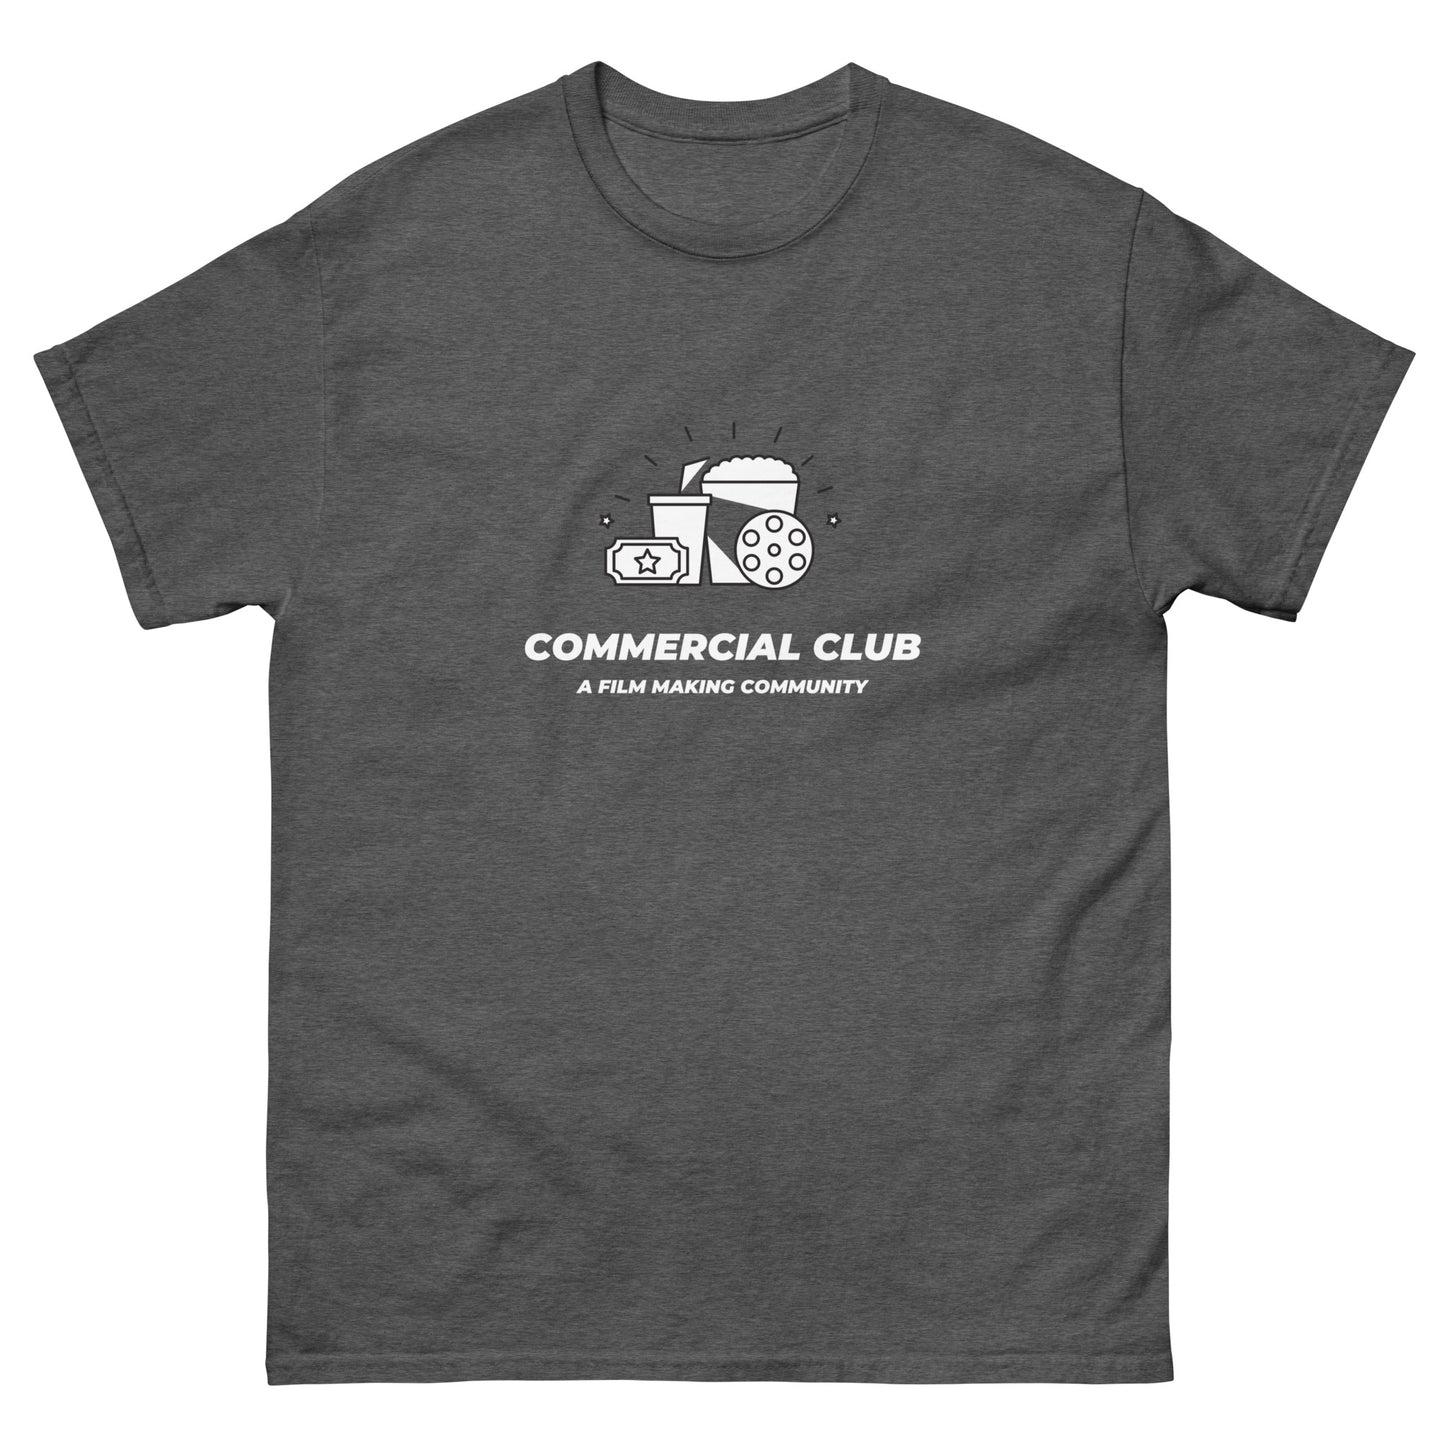 Commercial Club